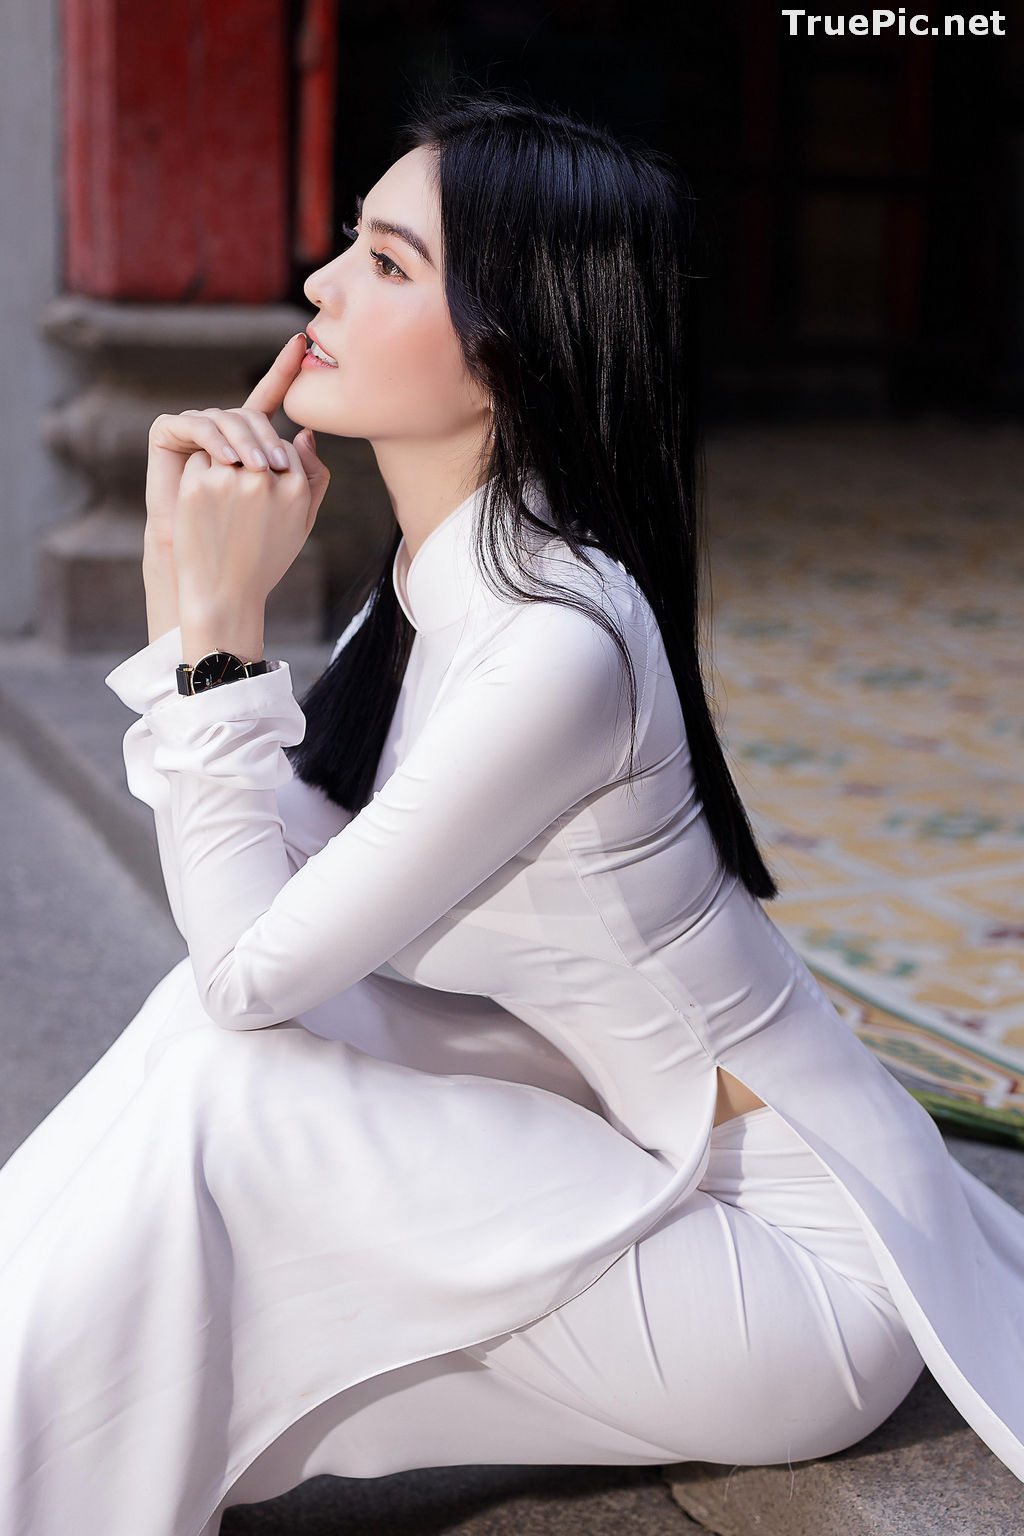 Image The Beauty of Vietnamese Girls with Traditional Dress (Ao Dai) #2 - TruePic.net - Picture-51